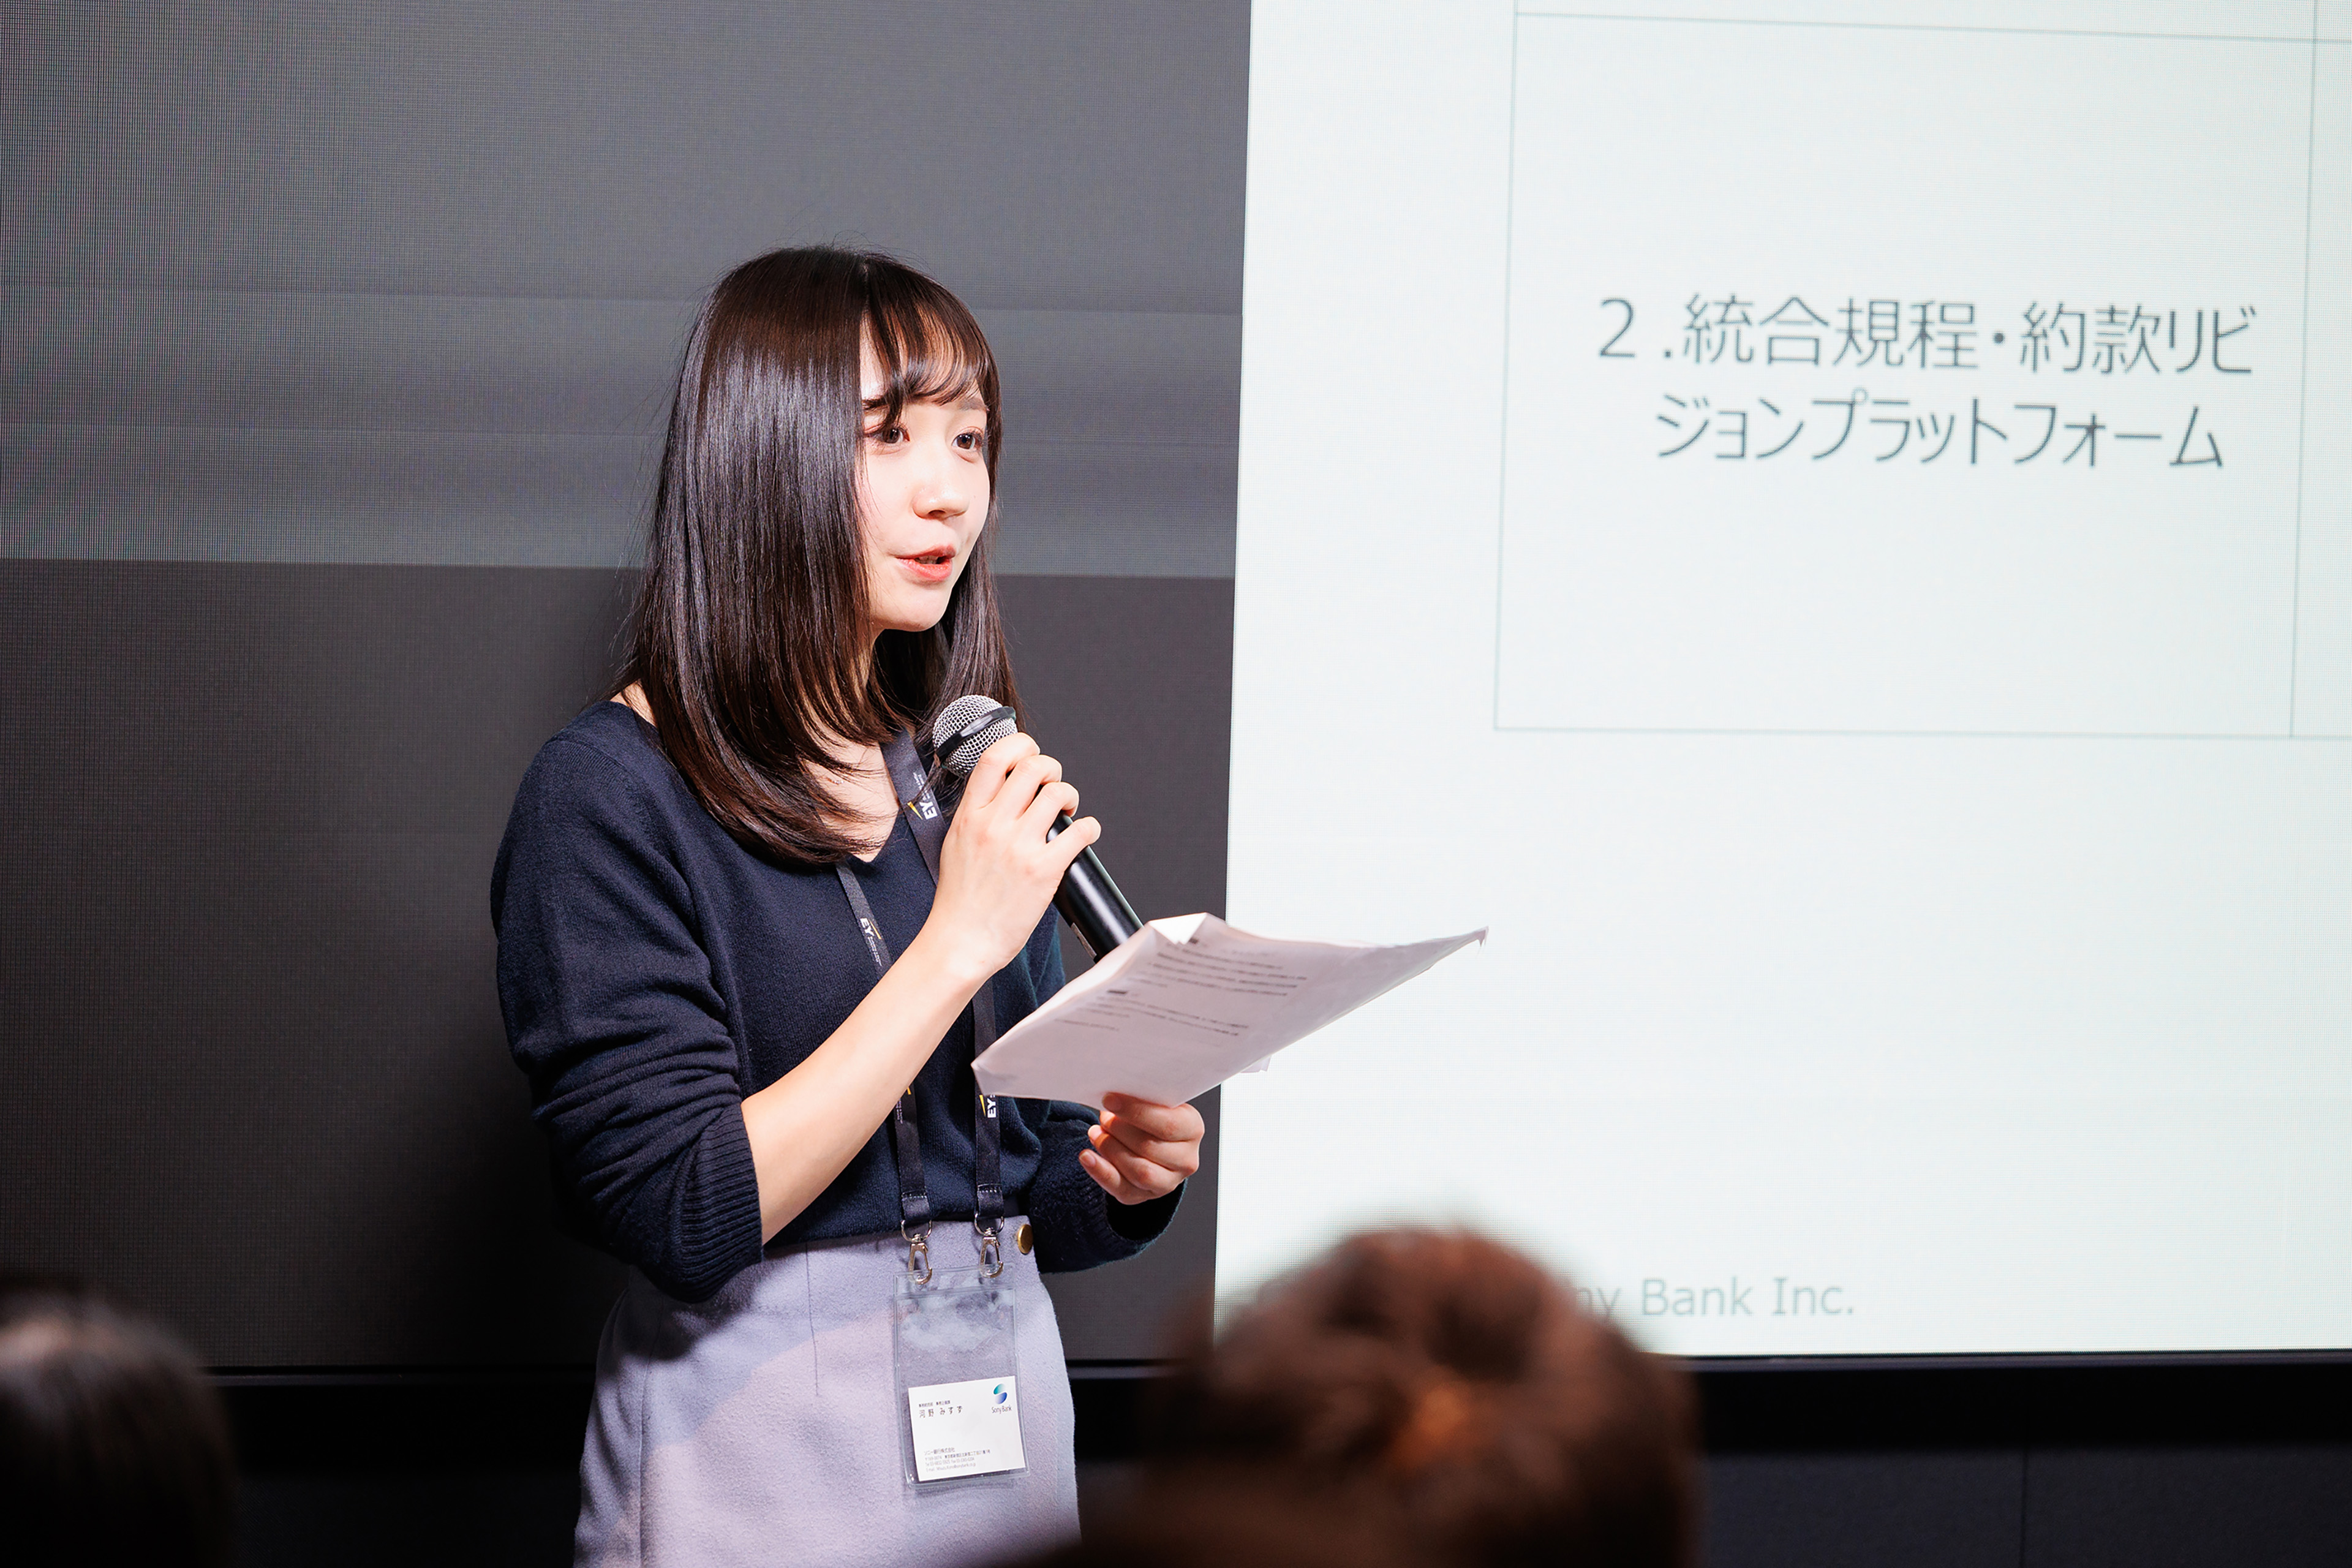 EY Ideation for Innovation ピッチコンテスト